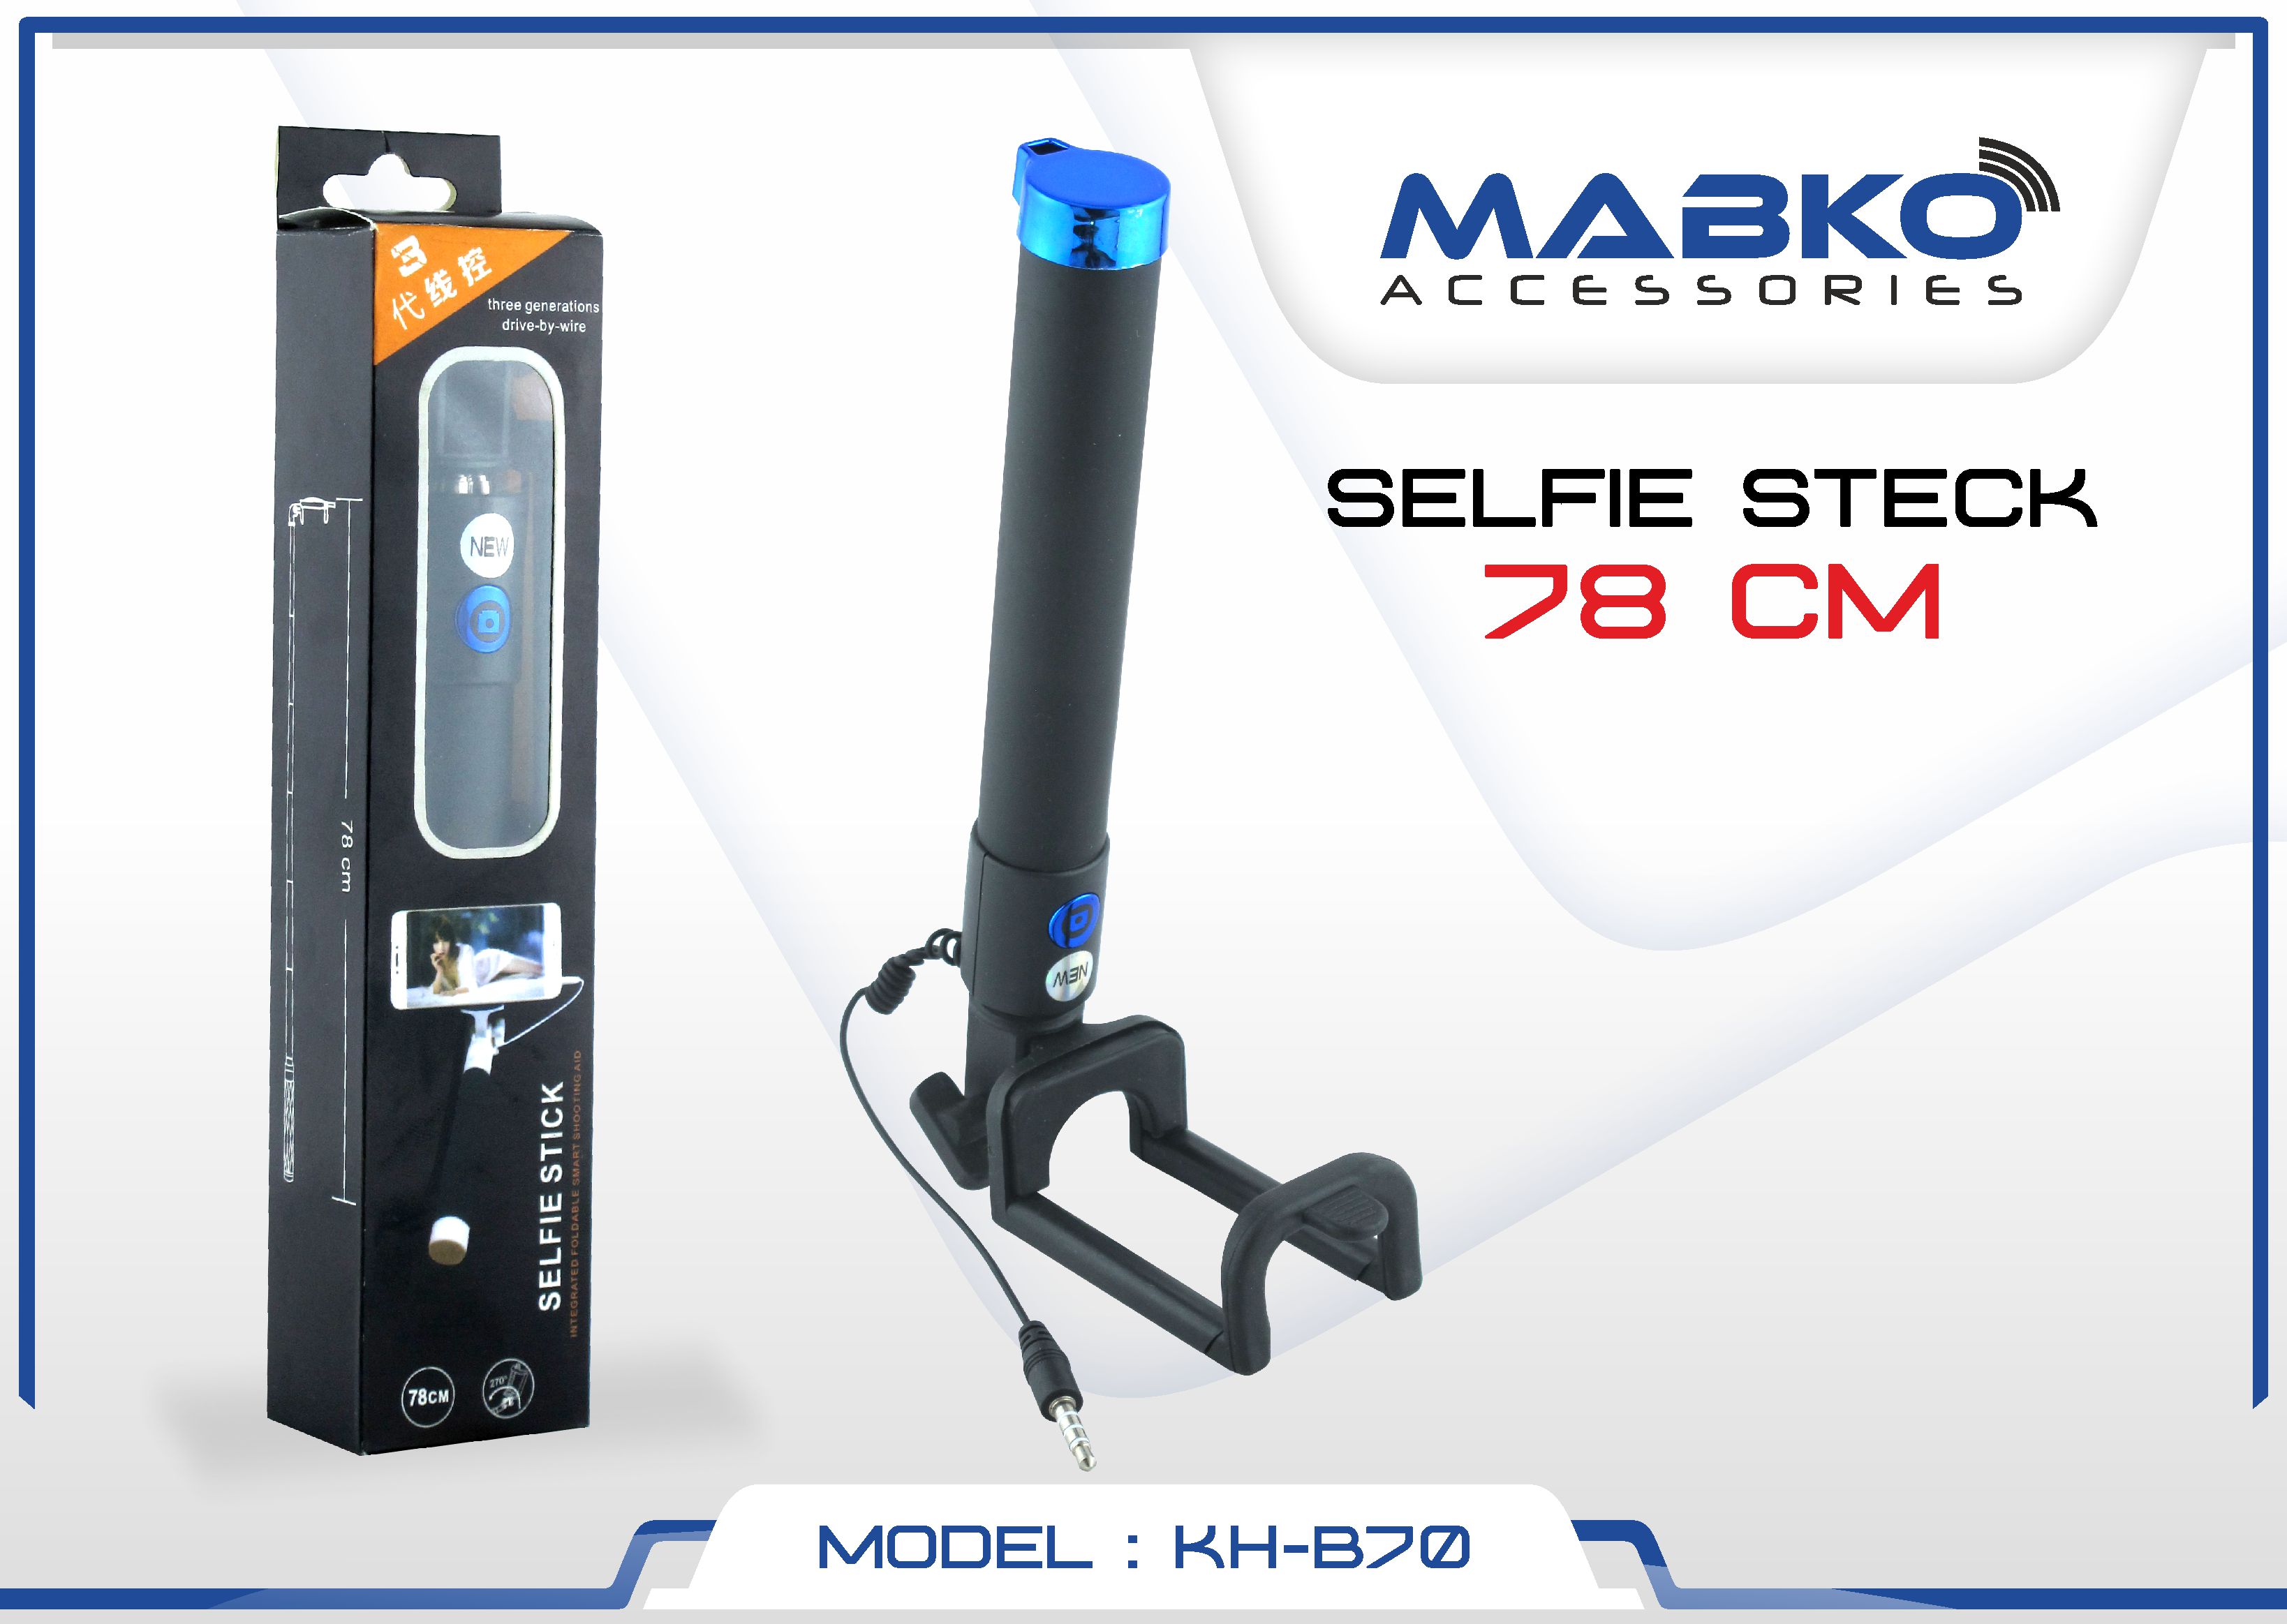 KH-J004 MABKO CHARGER 3.4A